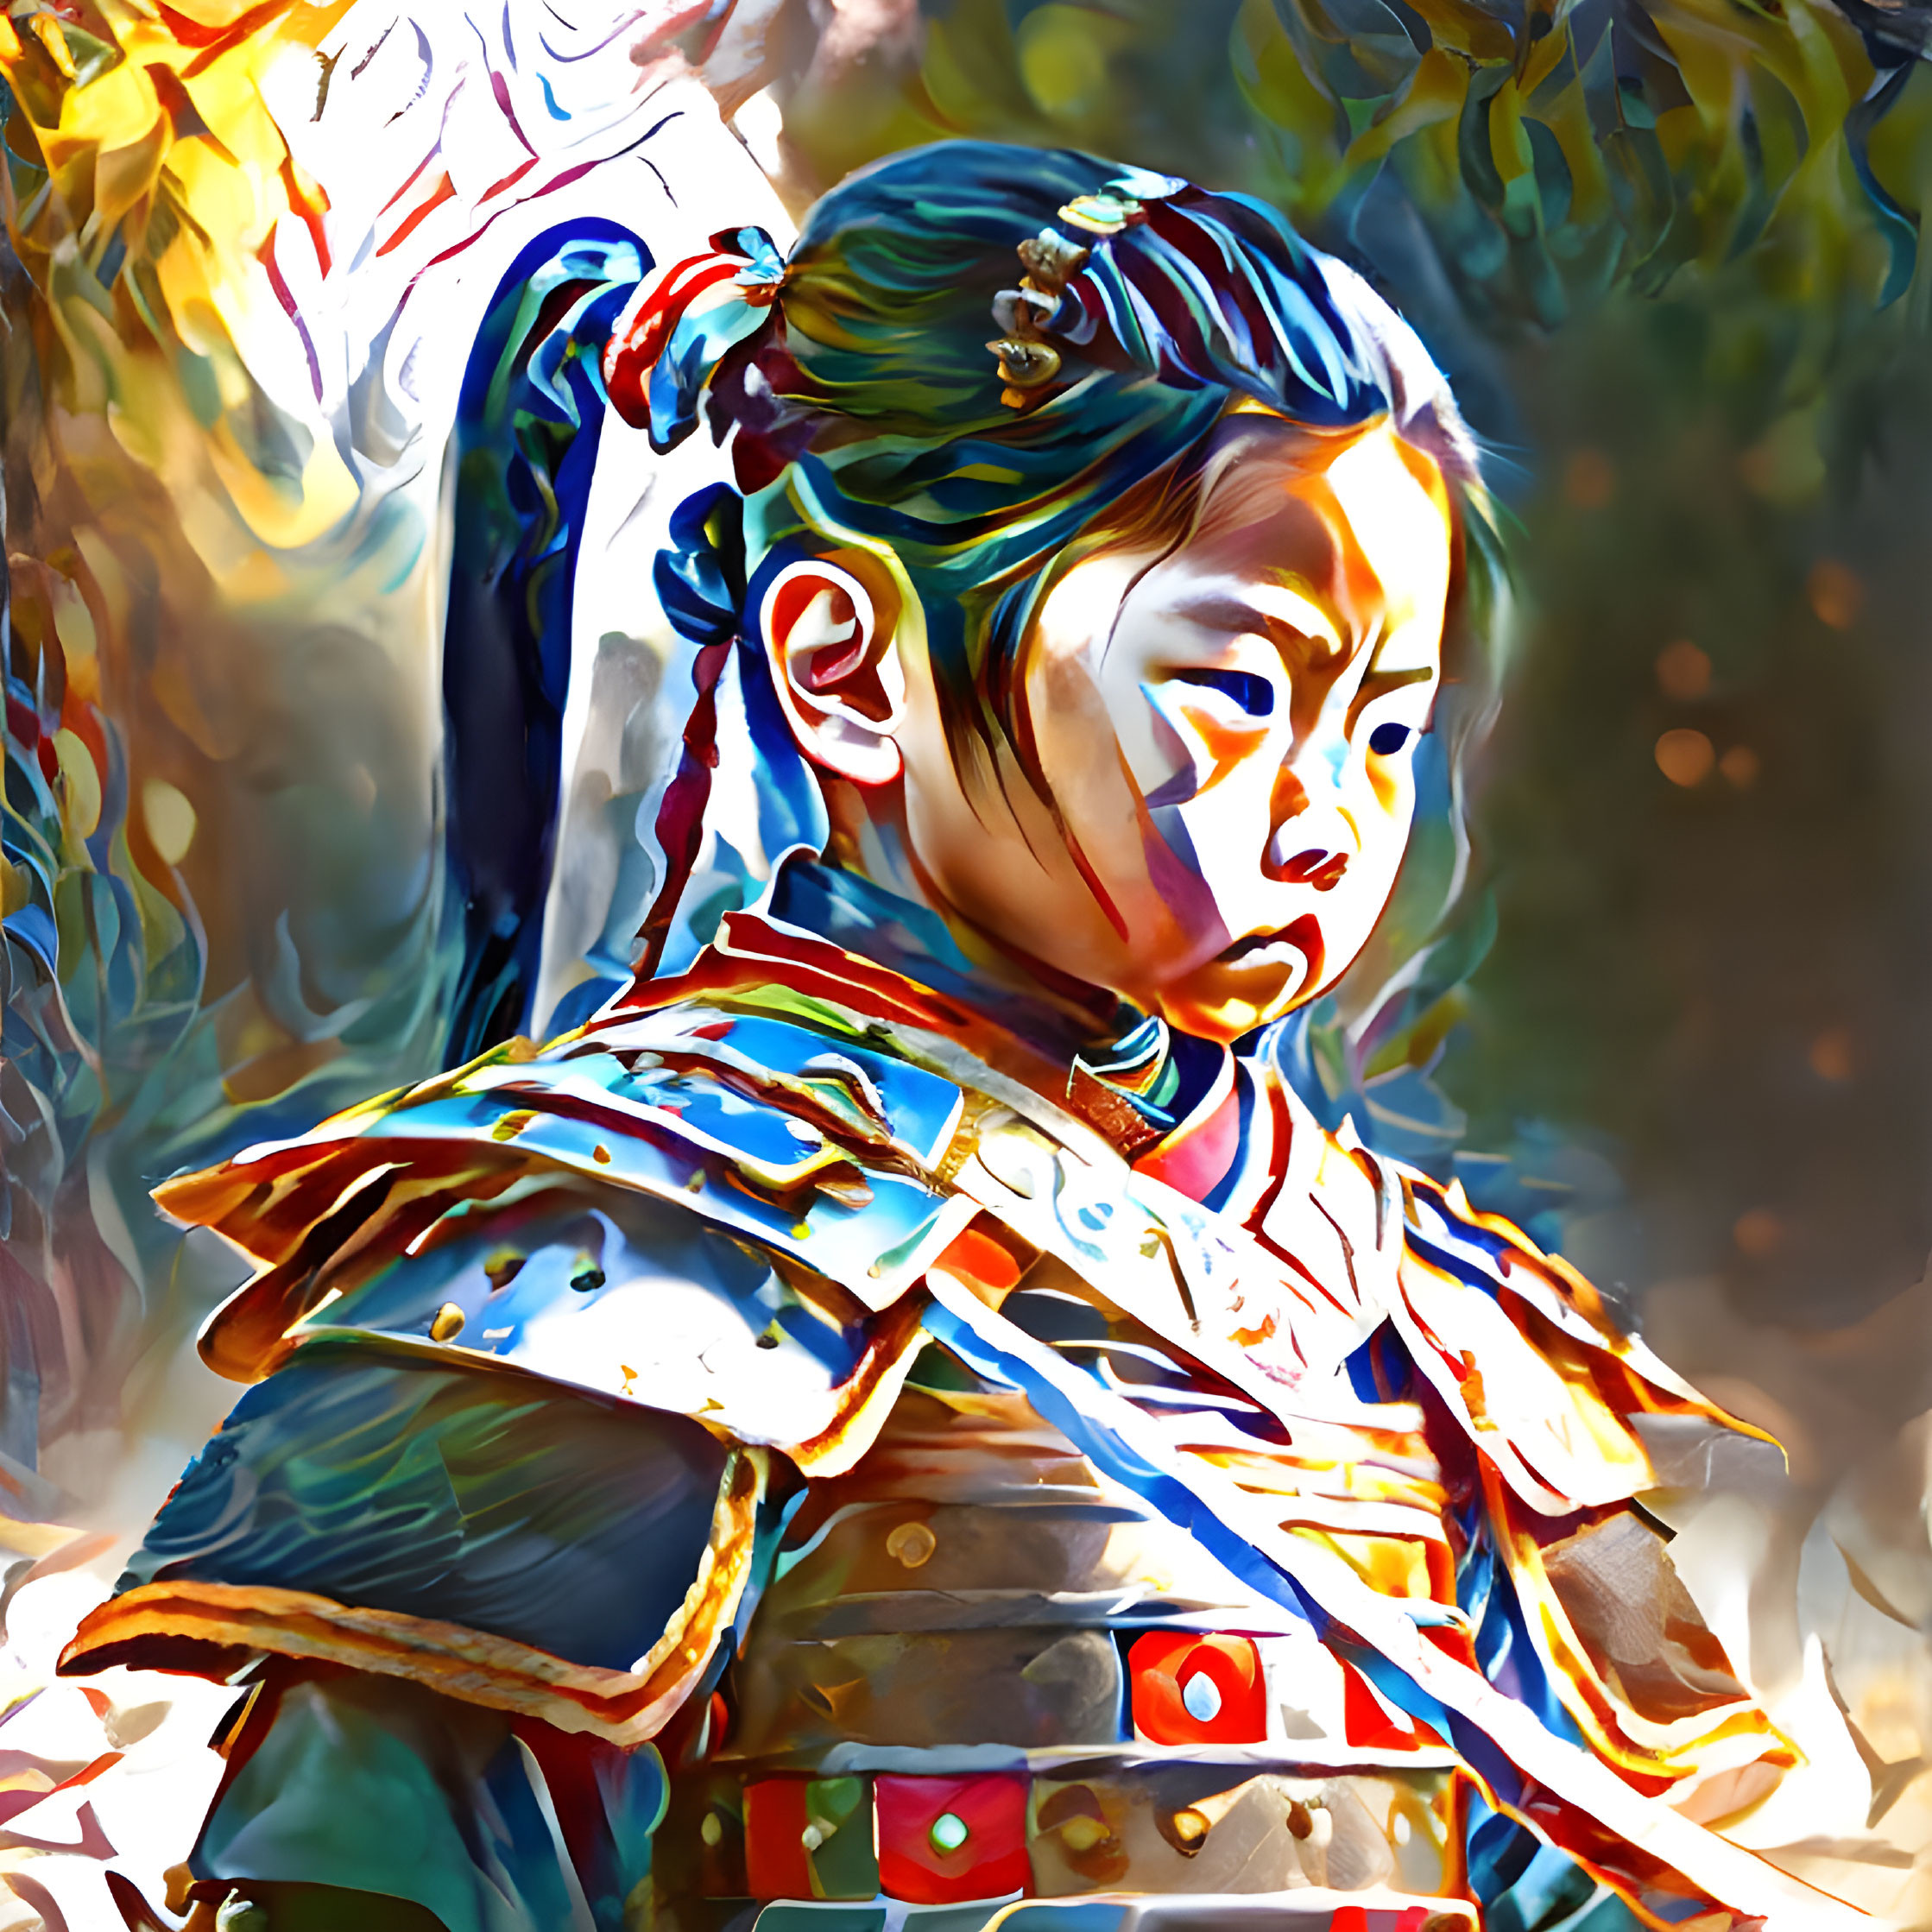 Child in East Asian armor with vibrant background